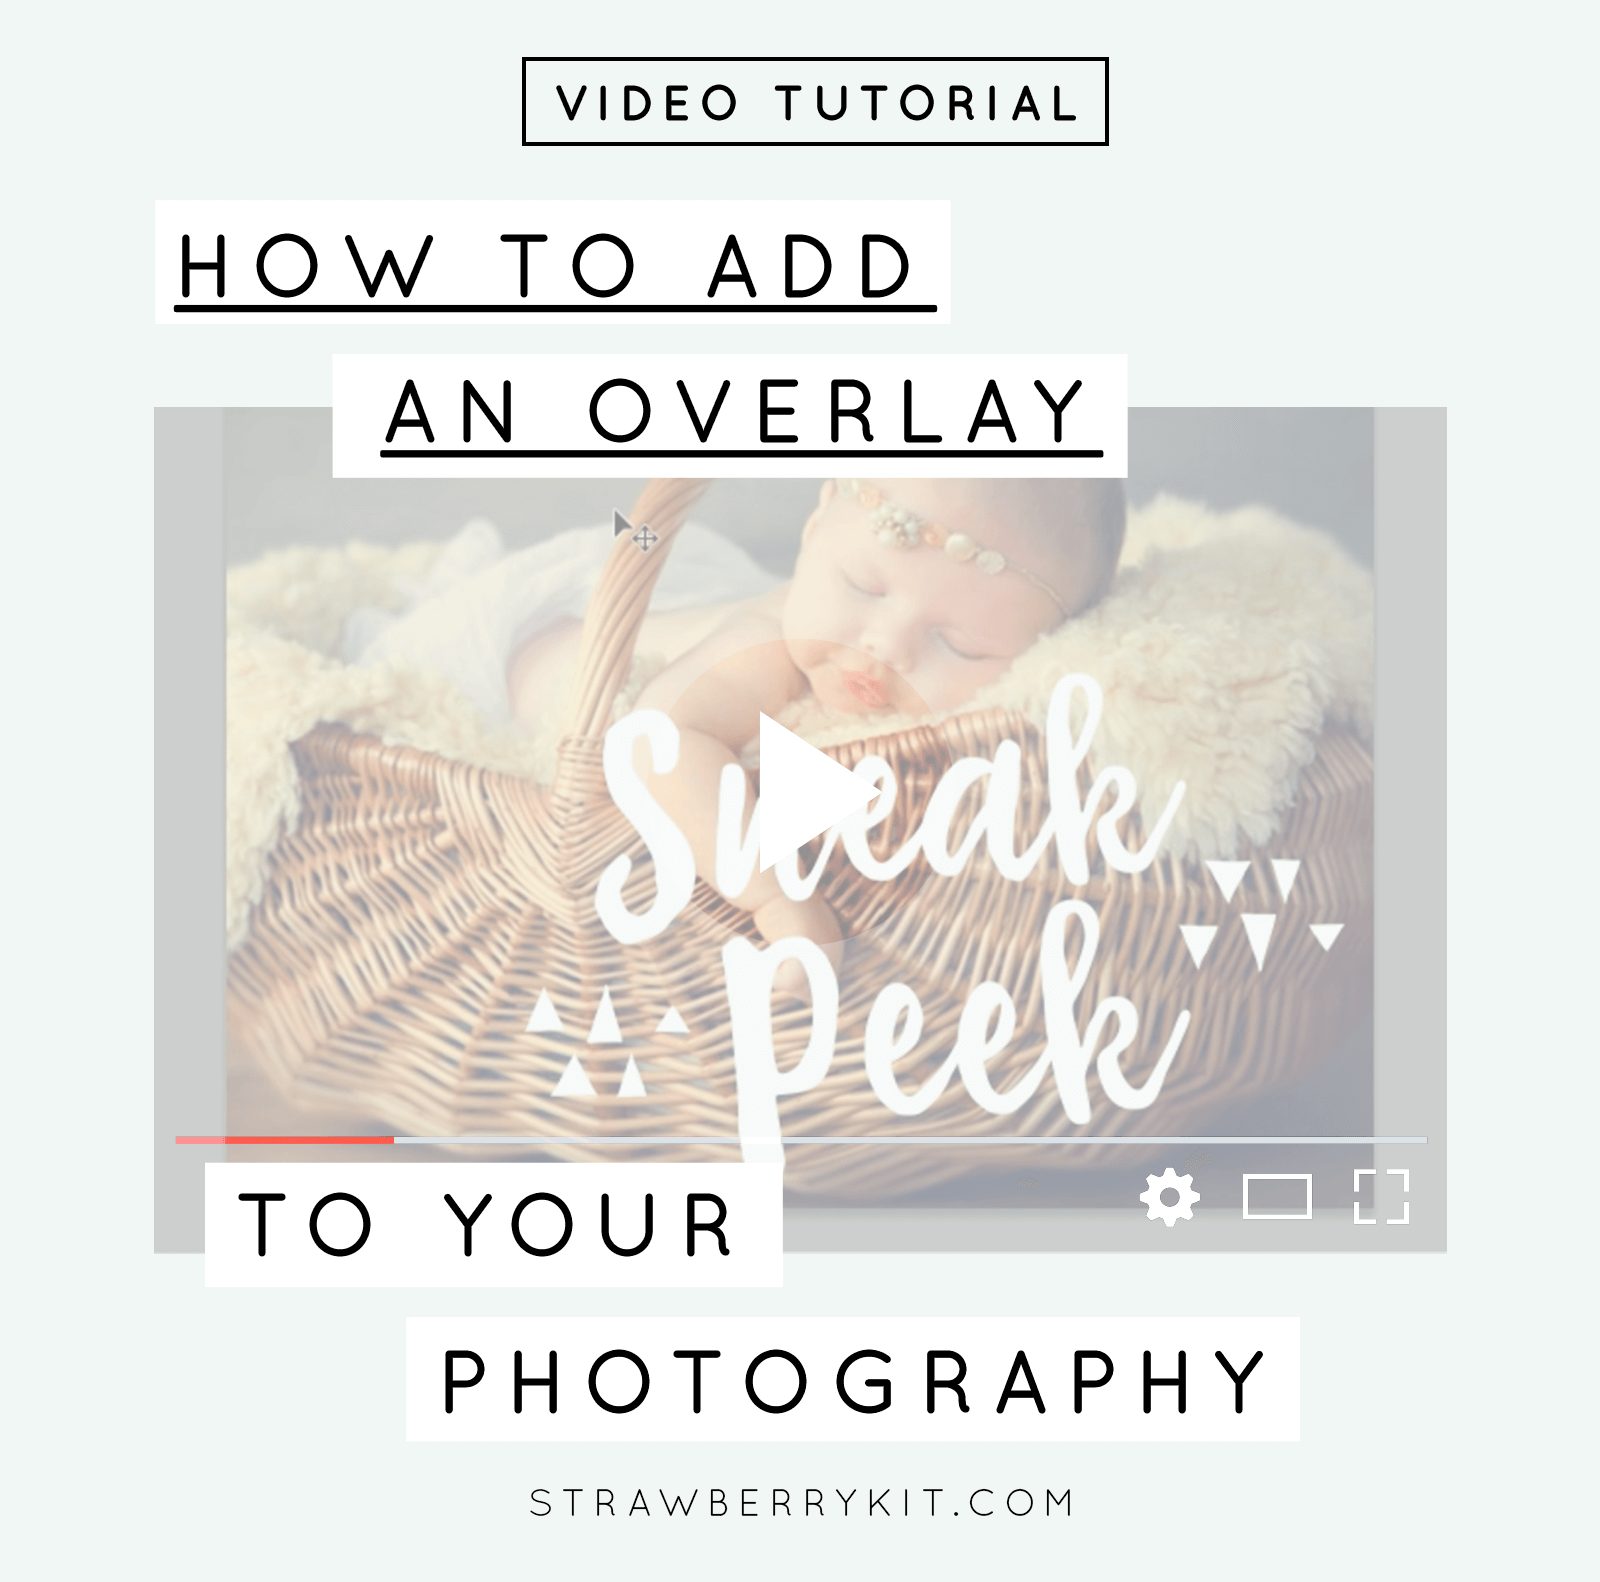 How to add an overlay to photograph